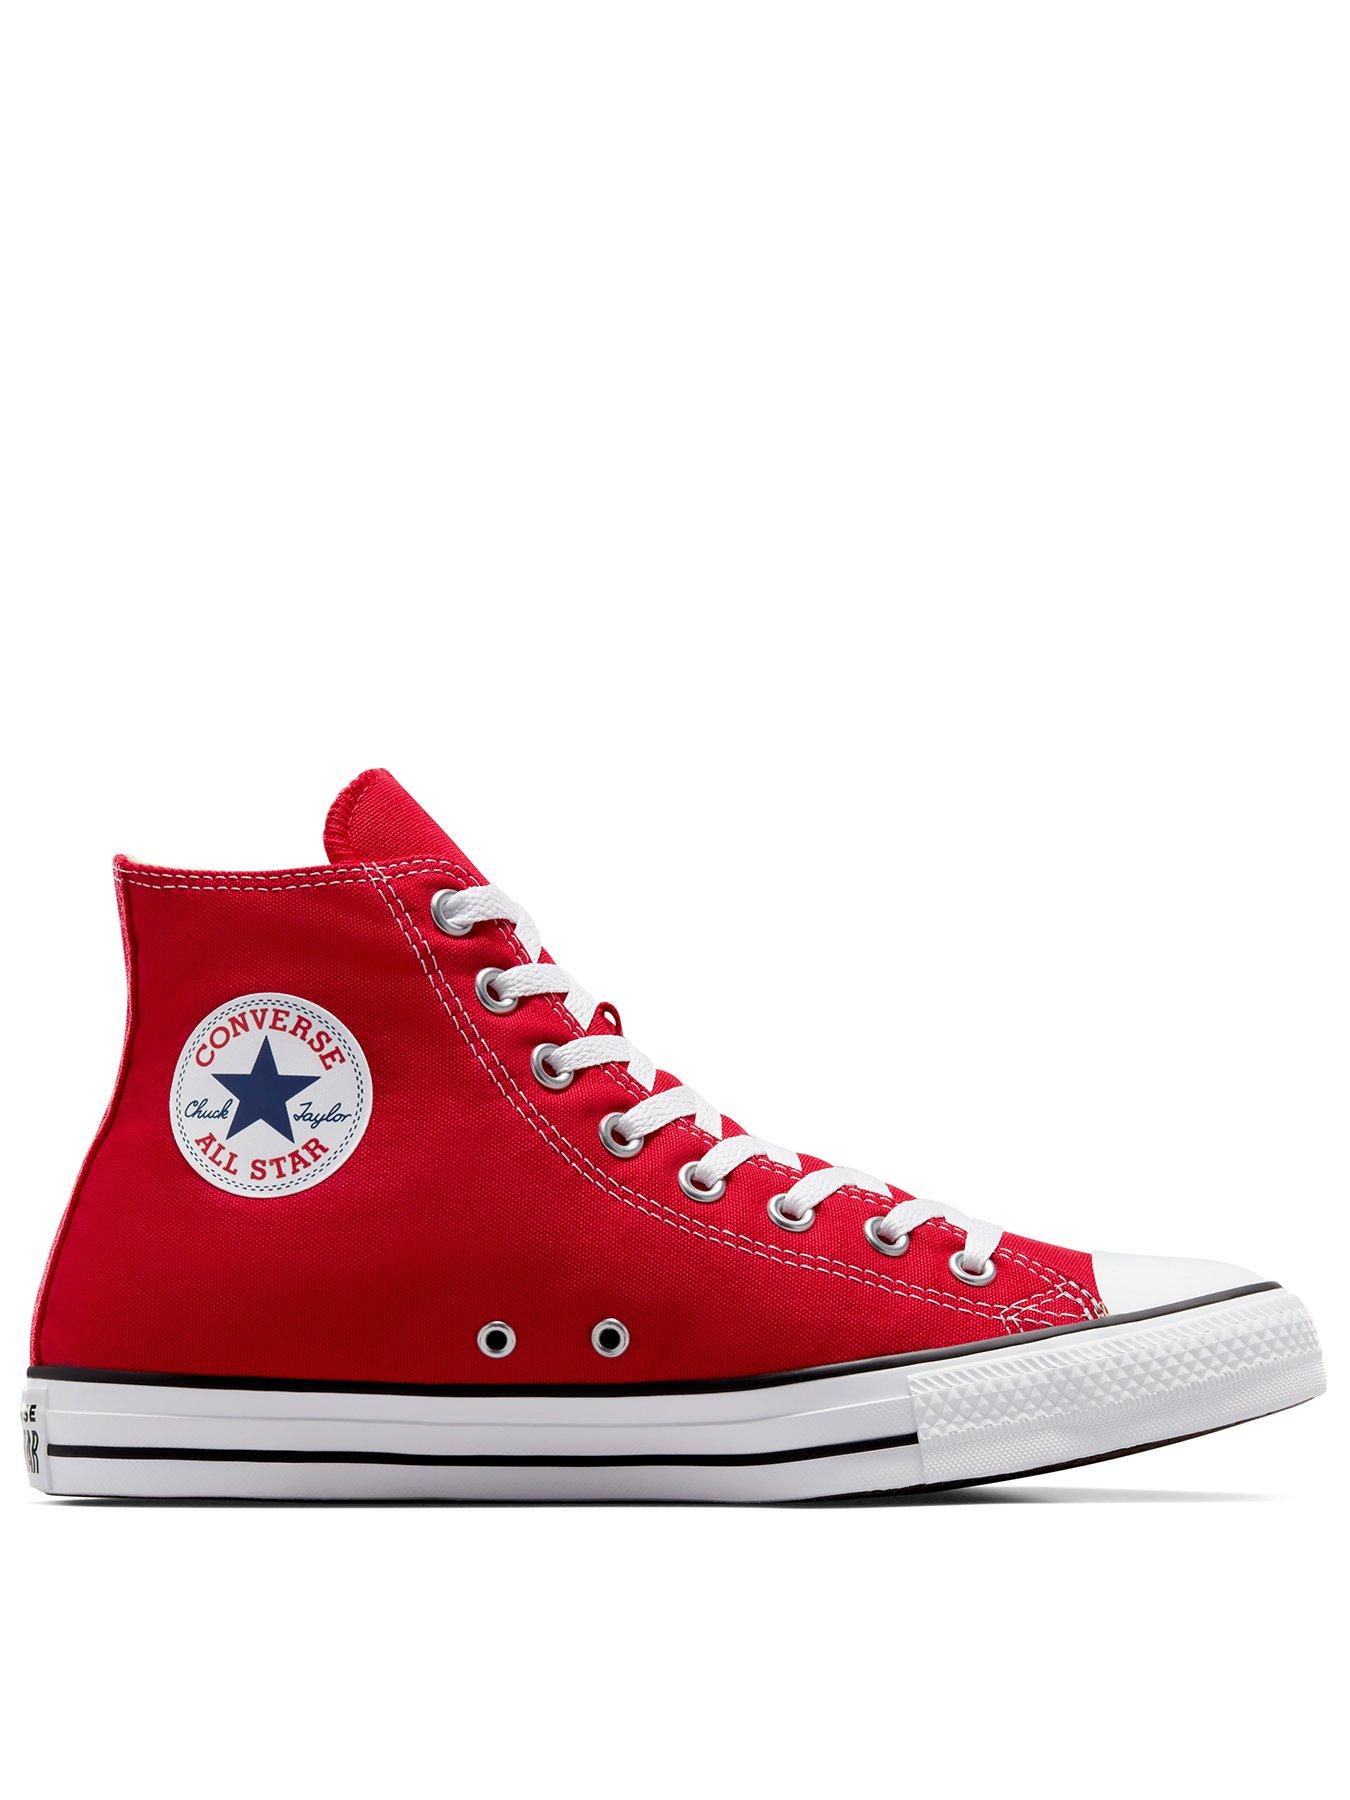 converse size 6 red